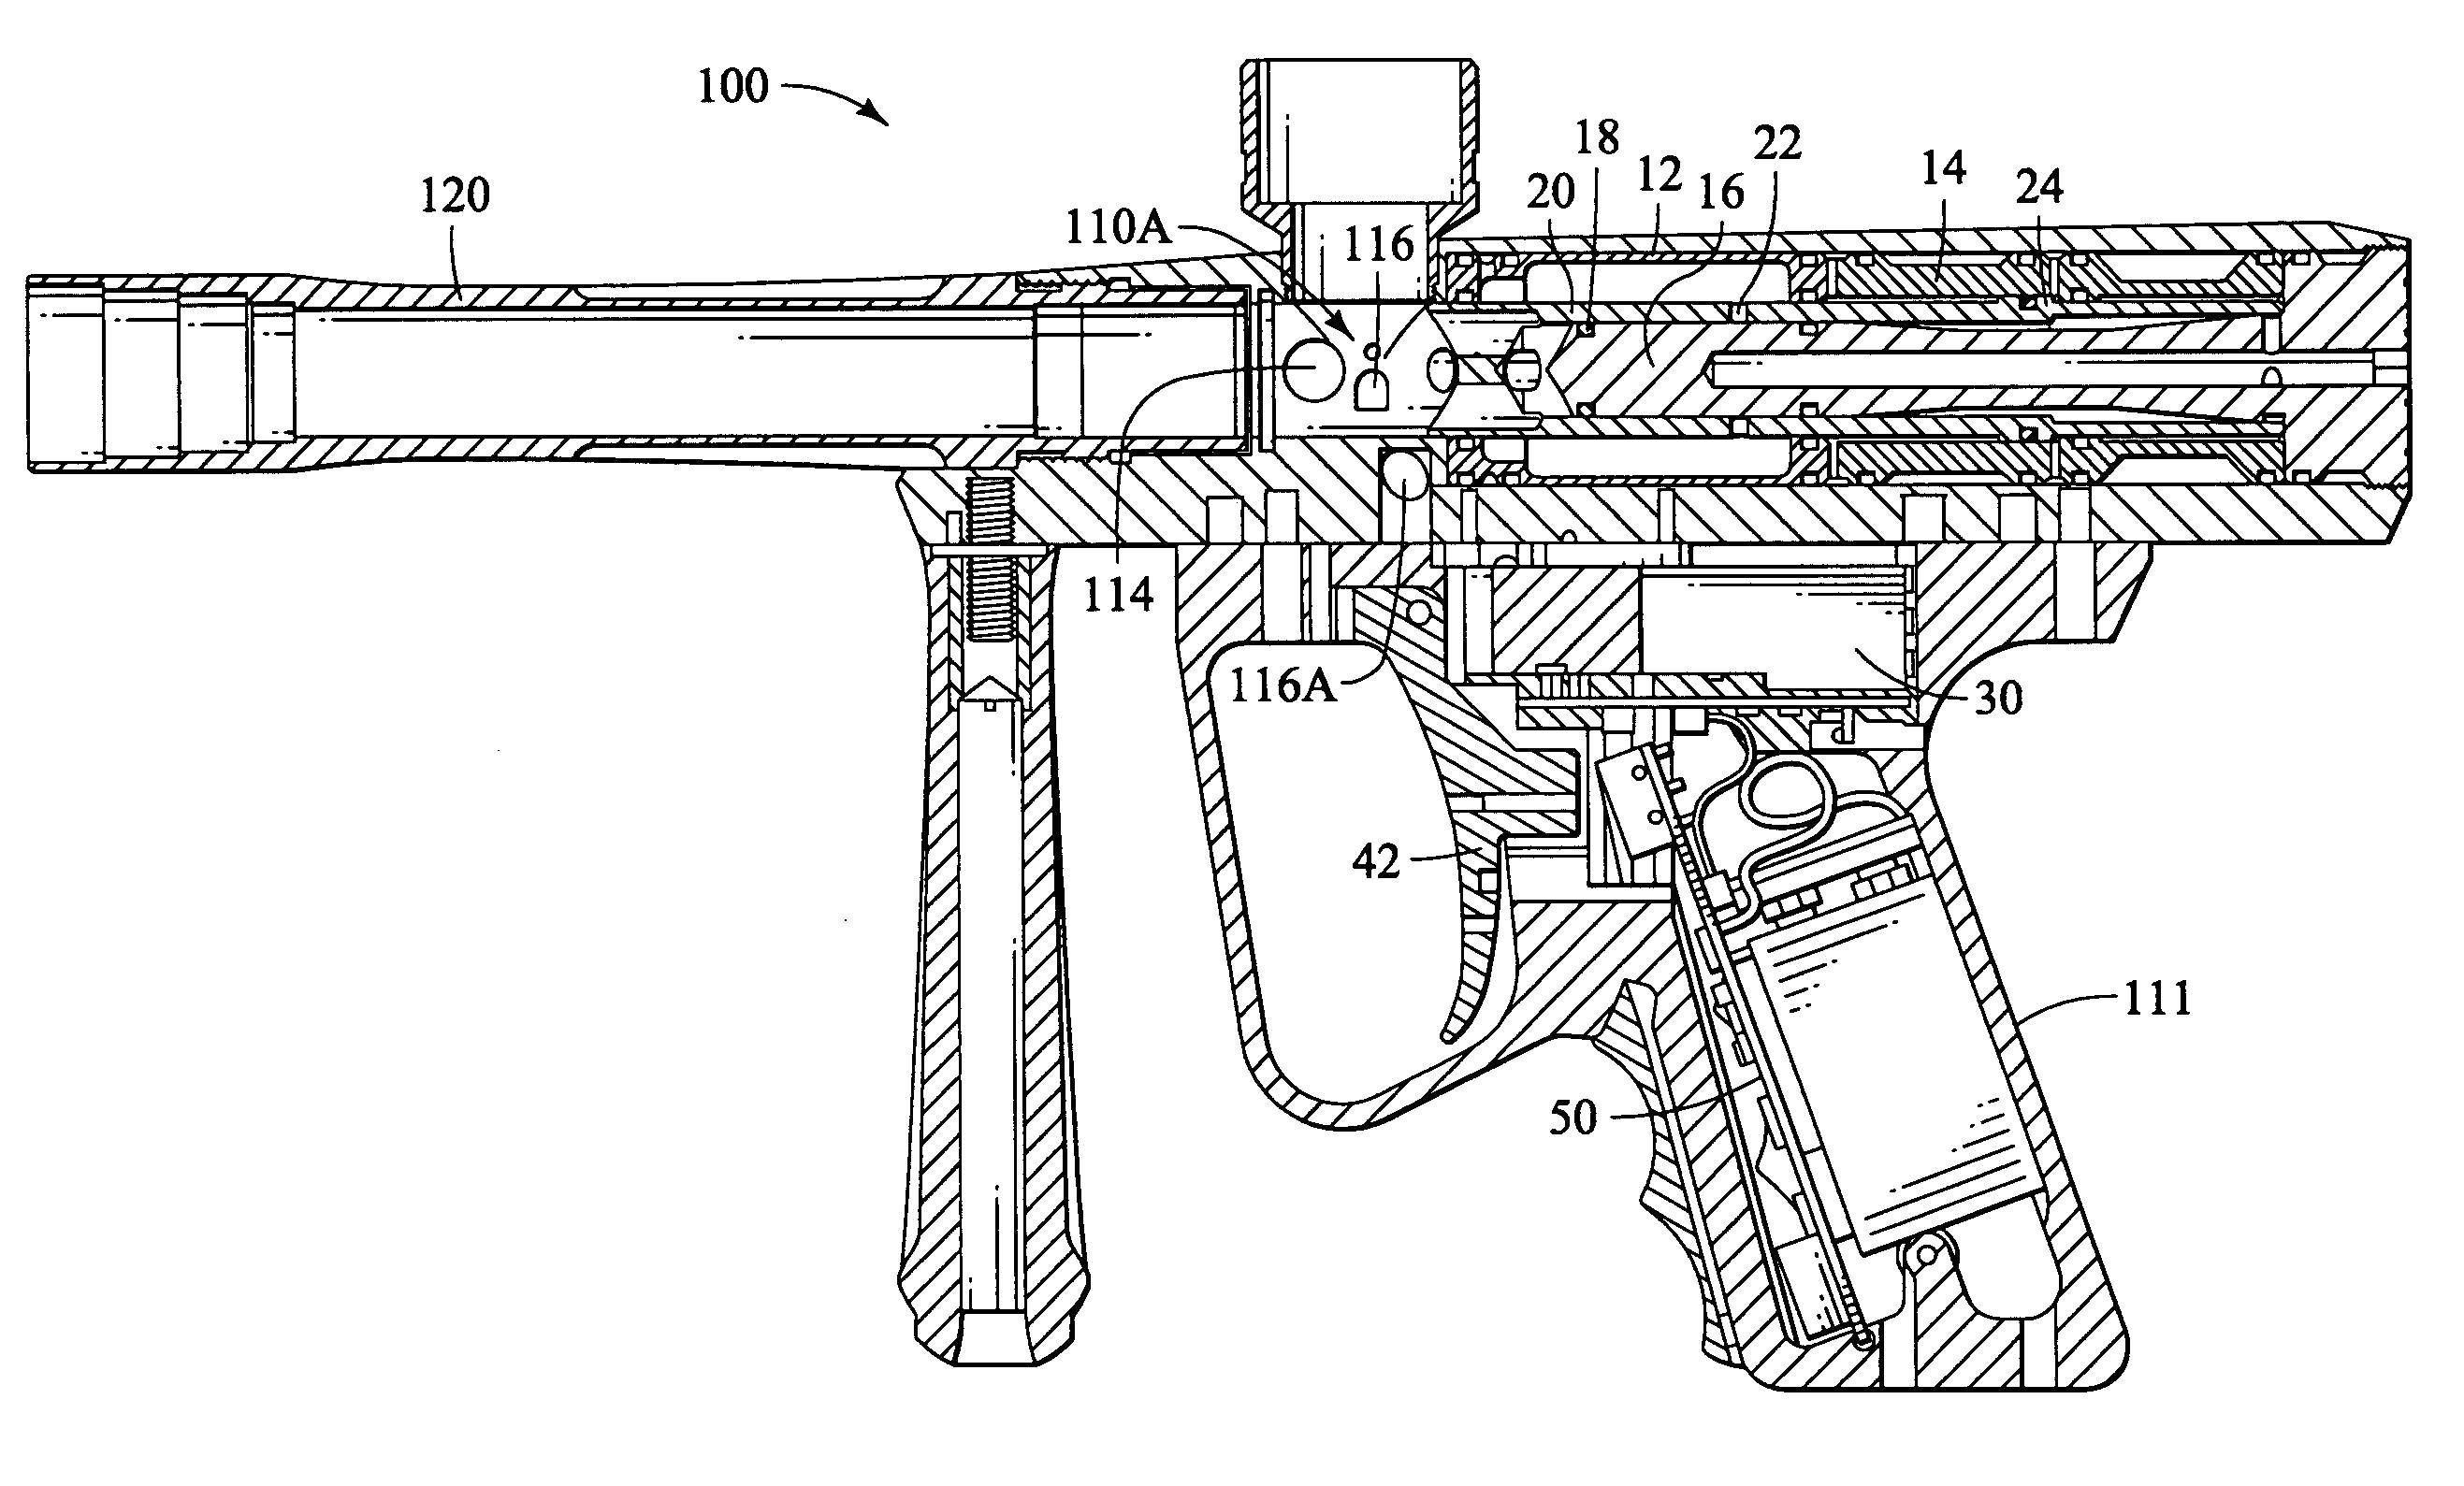 Coloring The structure of the machine. Category weapons. Tags:  gun, automatic.